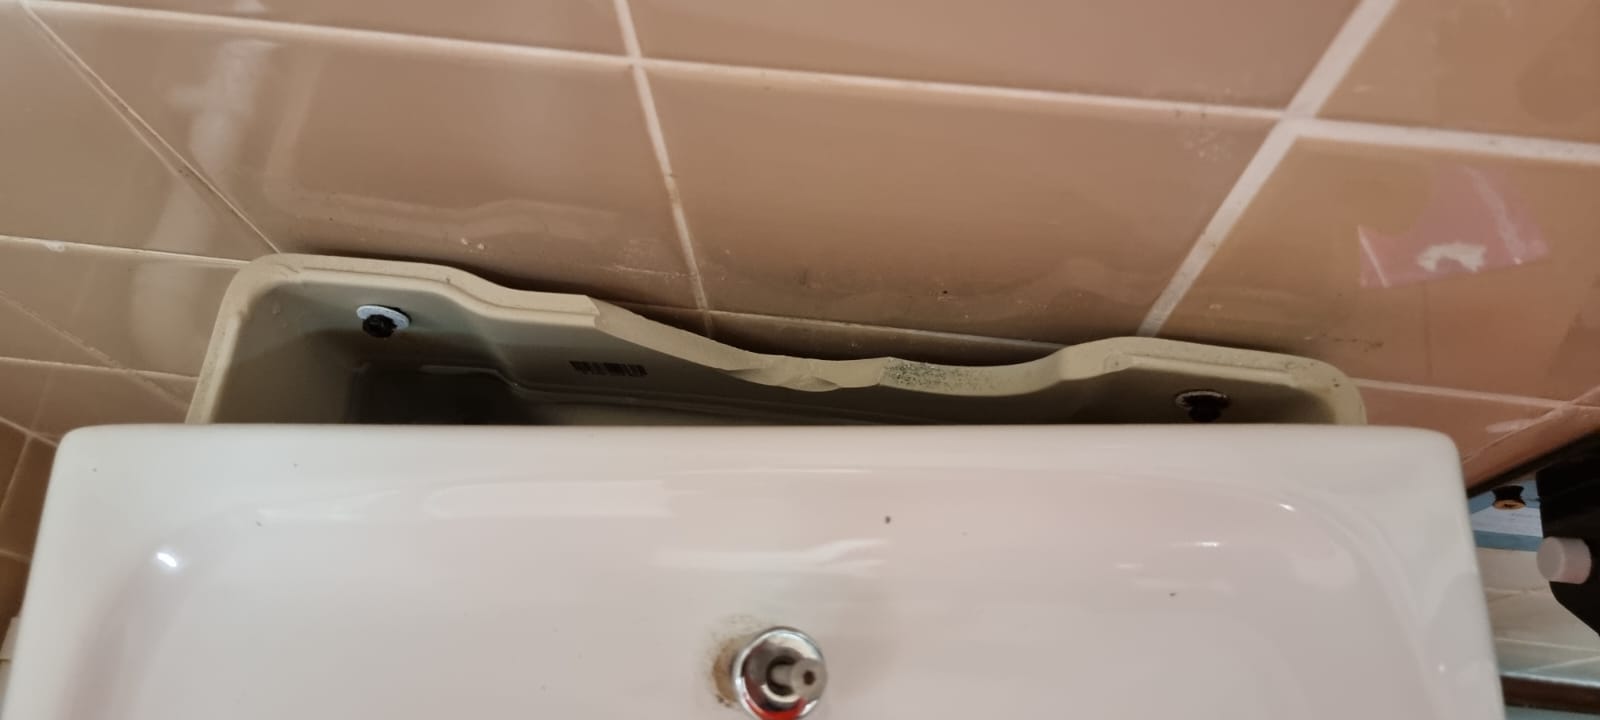 image of a damaged toilet in Holt